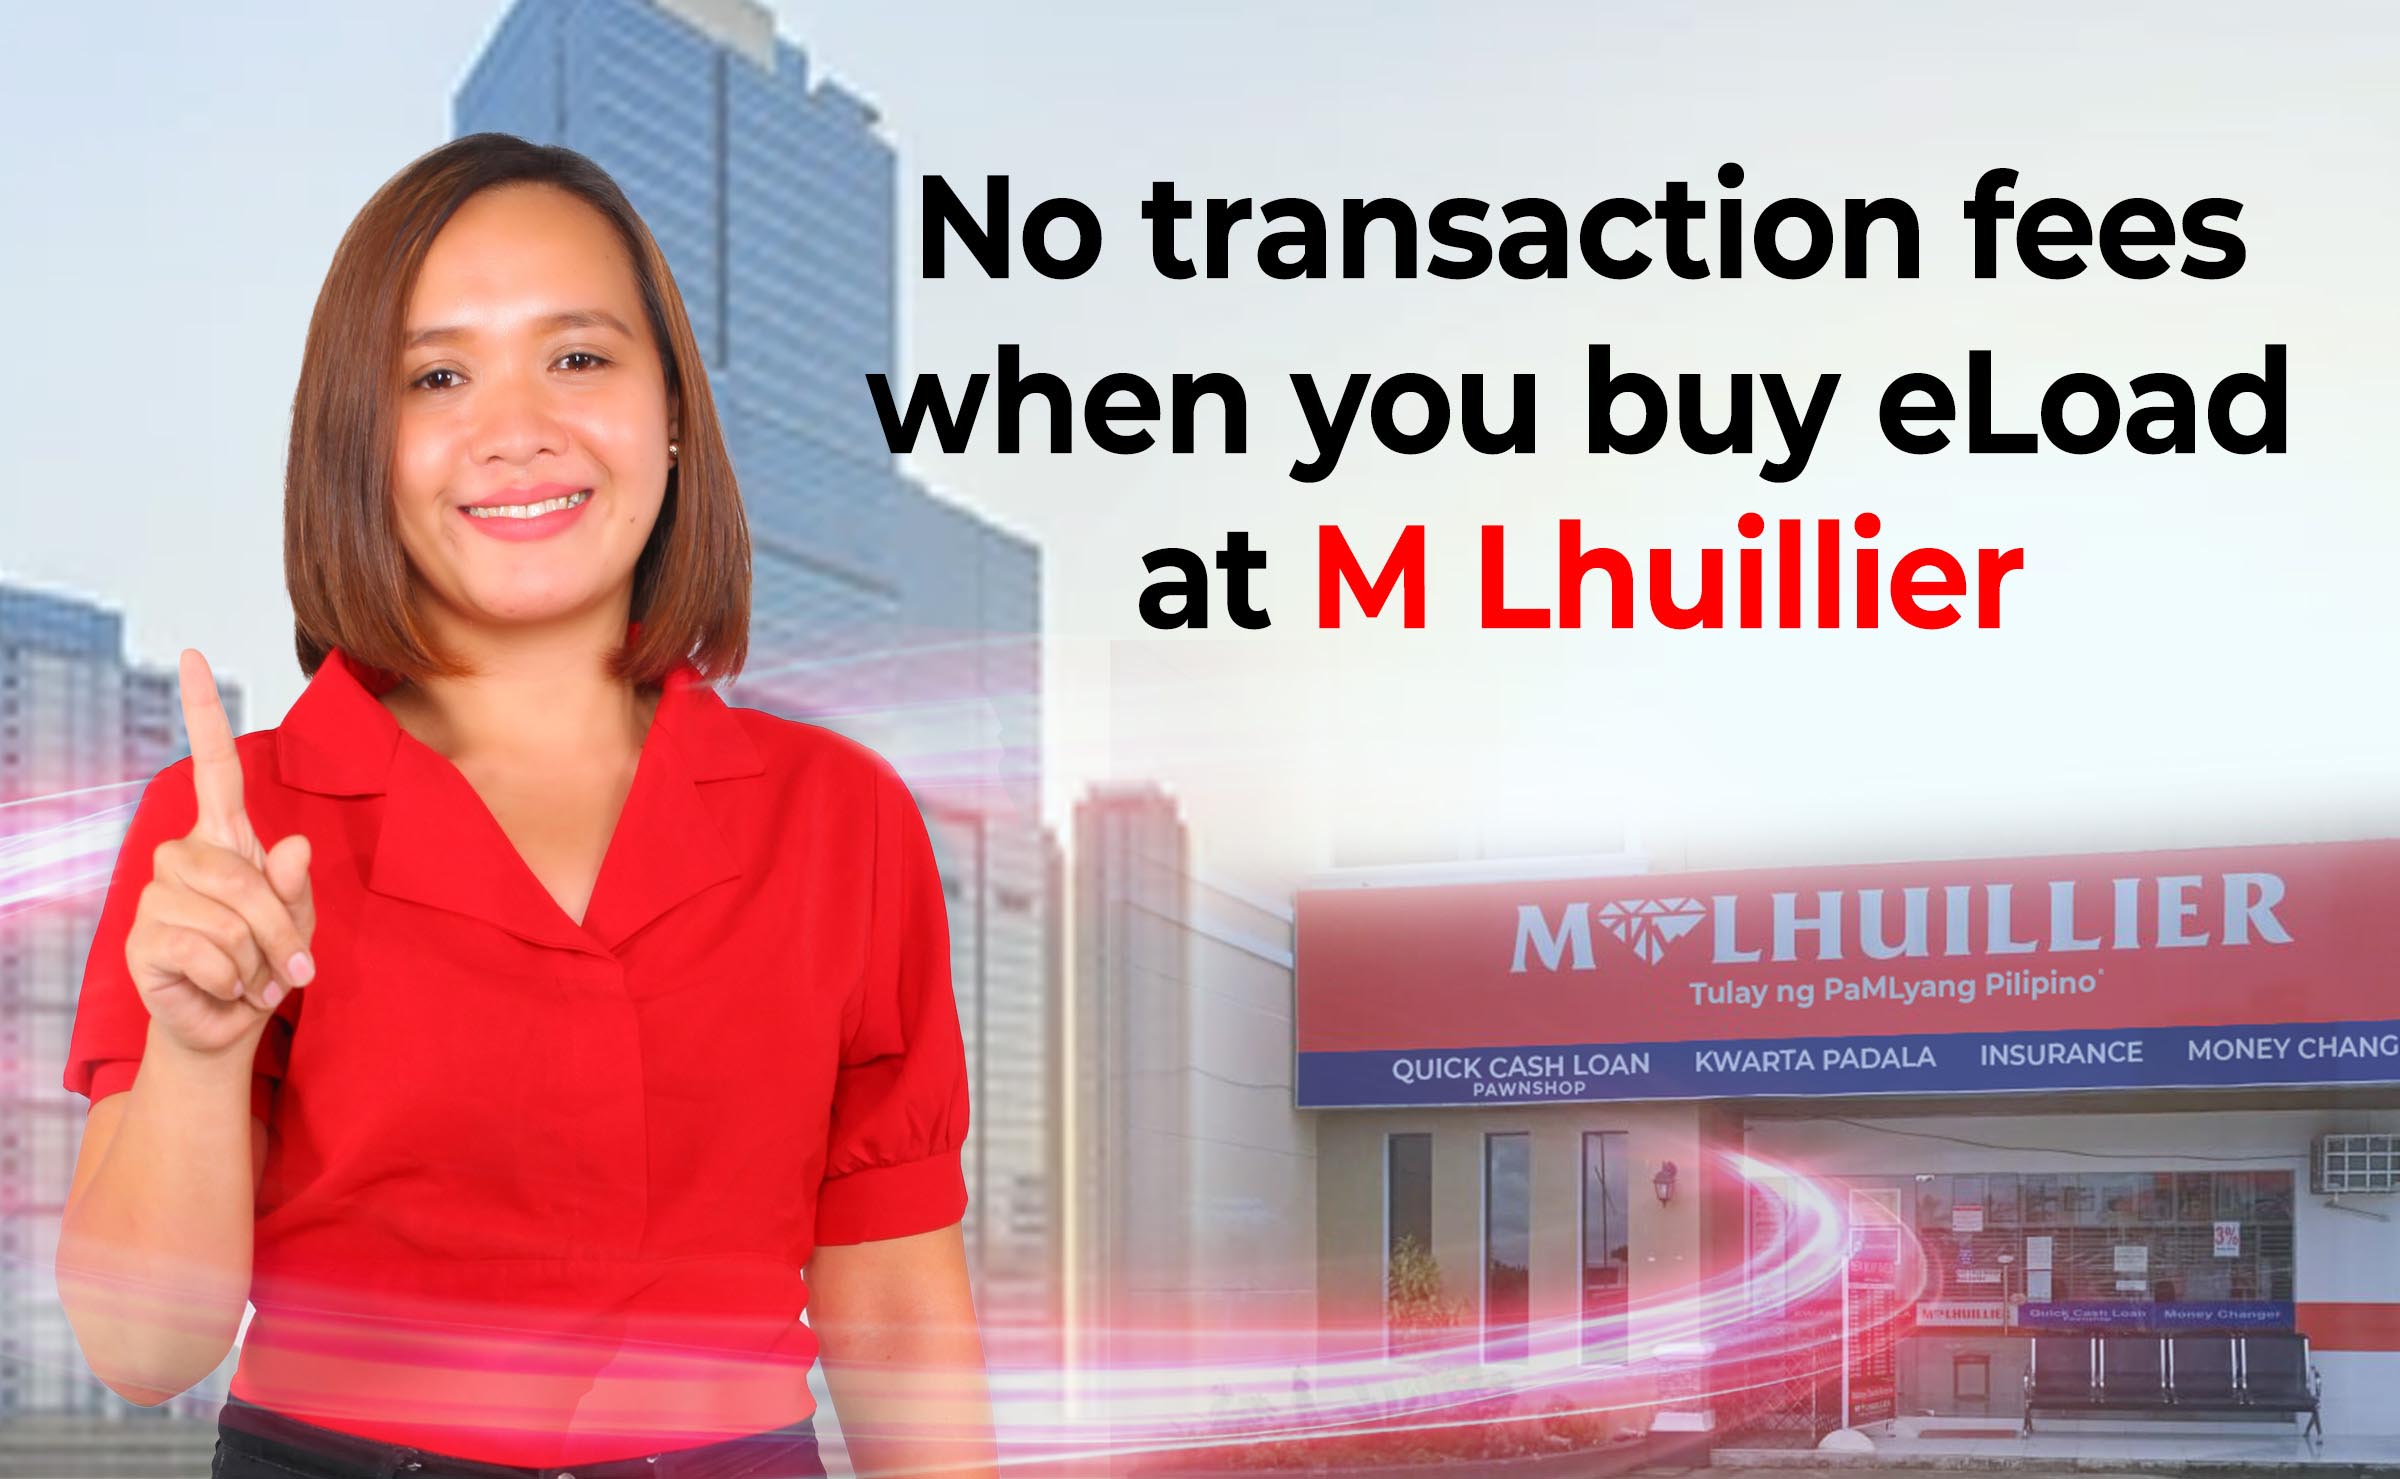 Quick and Easy eLoading with No Additional Fee at M Lhuillier